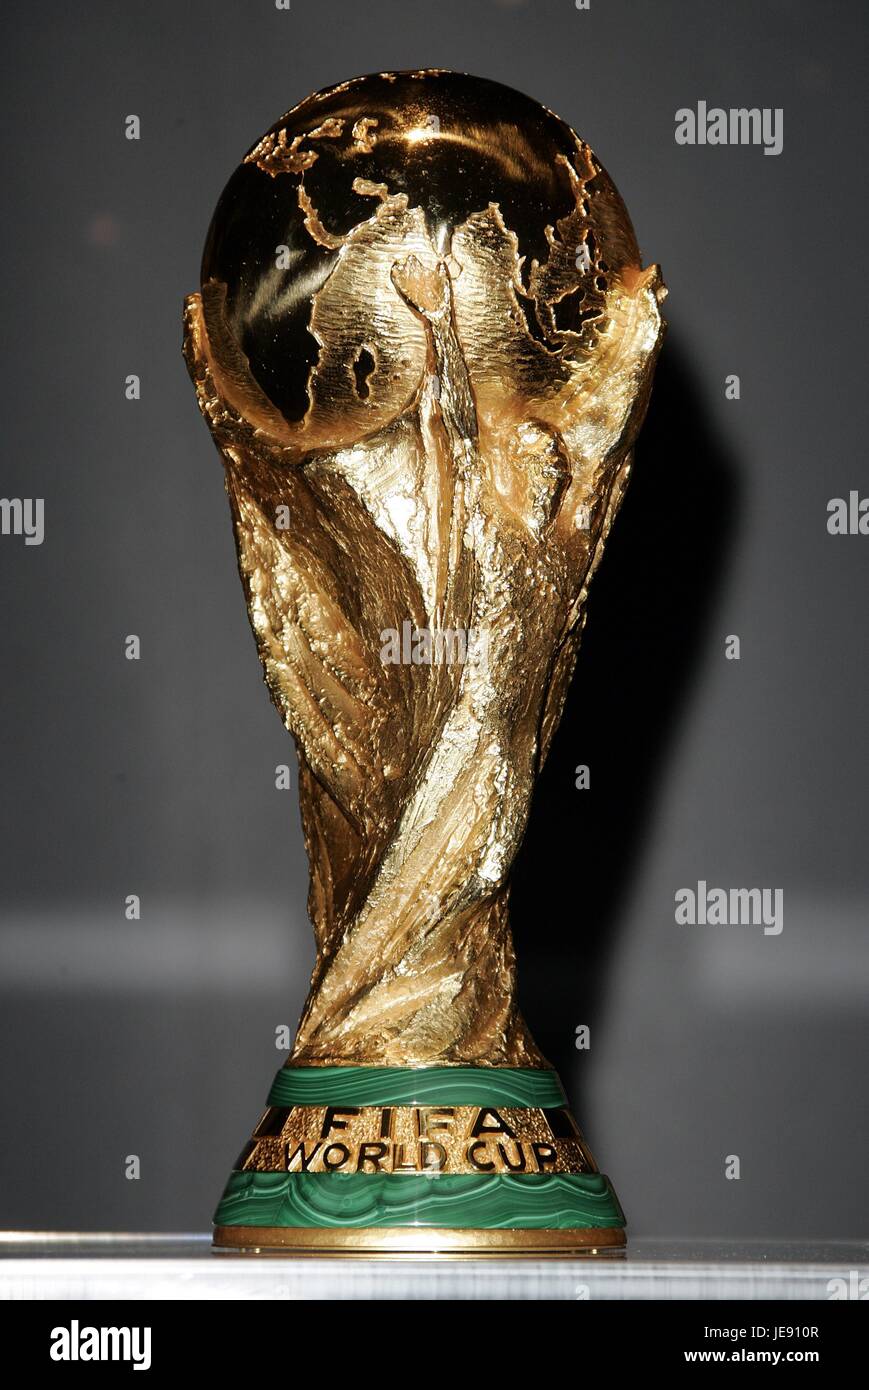 WORLD CUP TROPHY WORLD CUP TROPHY UNIVERSAL STUDIOS LOS ANGELES USA 19 February 2006 Stock Photo